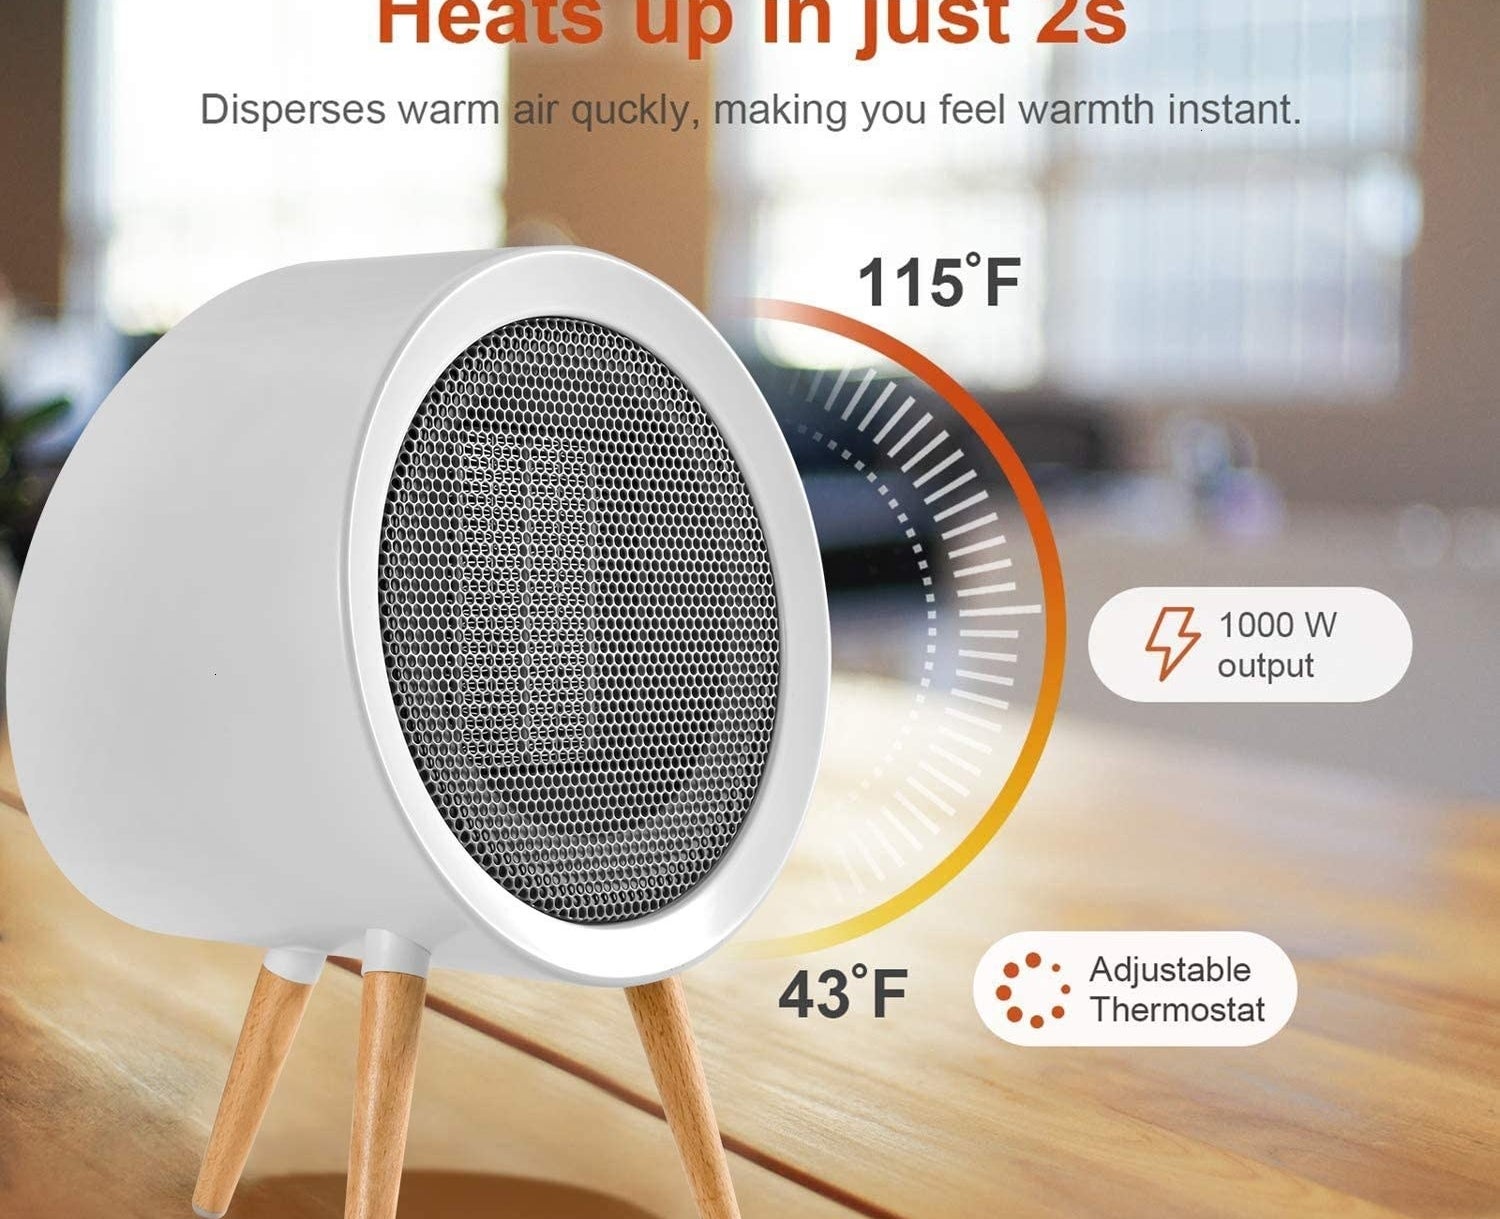 The space heater with a graphic showing the adjustable thermostat